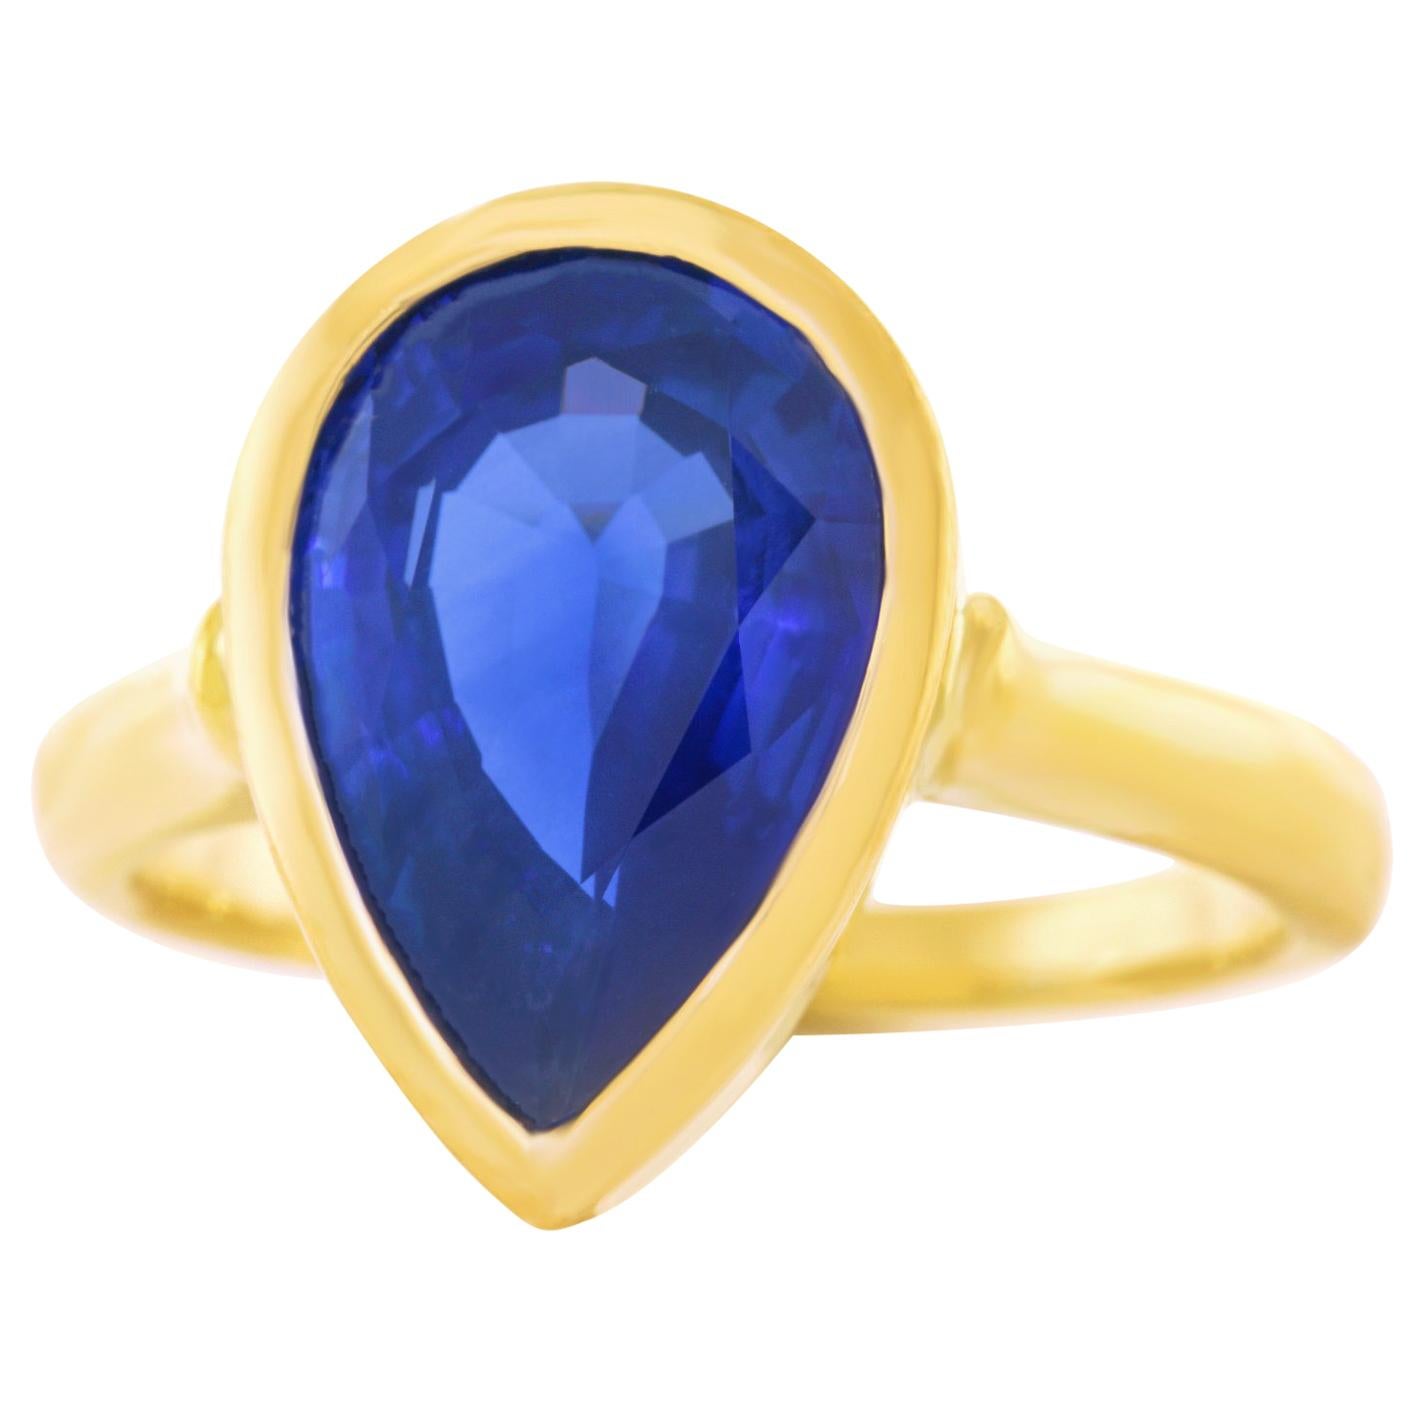 5.54 Carat Pear Shaped Sapphire Ring